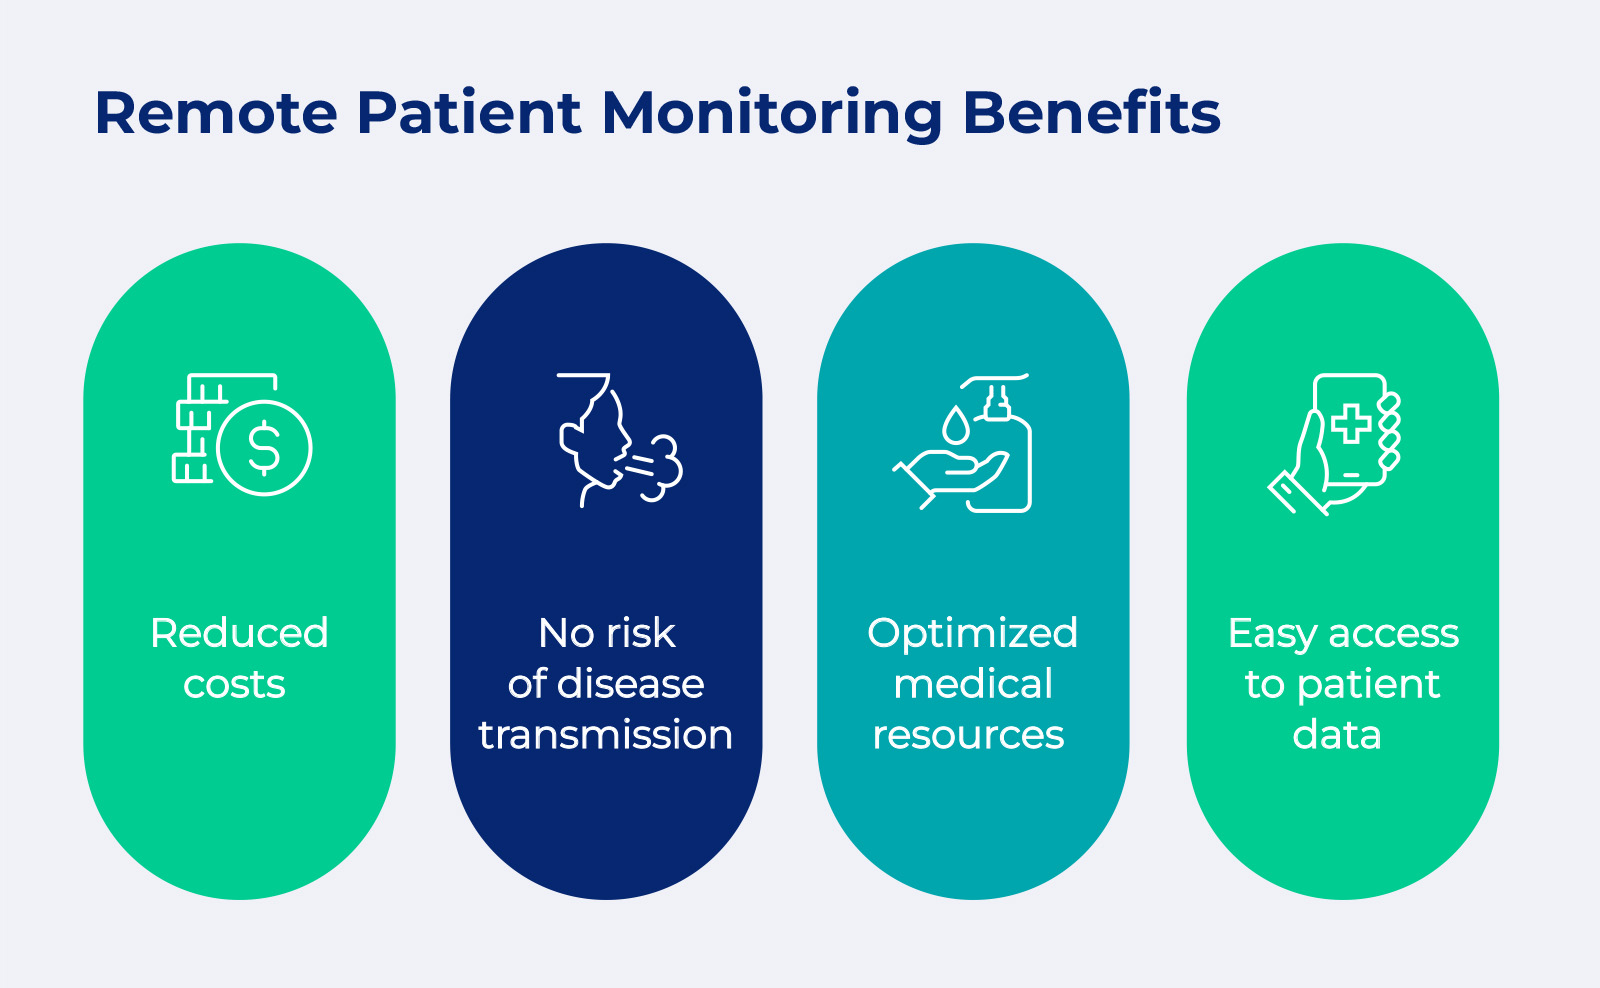 benefits of remote patient monitoring